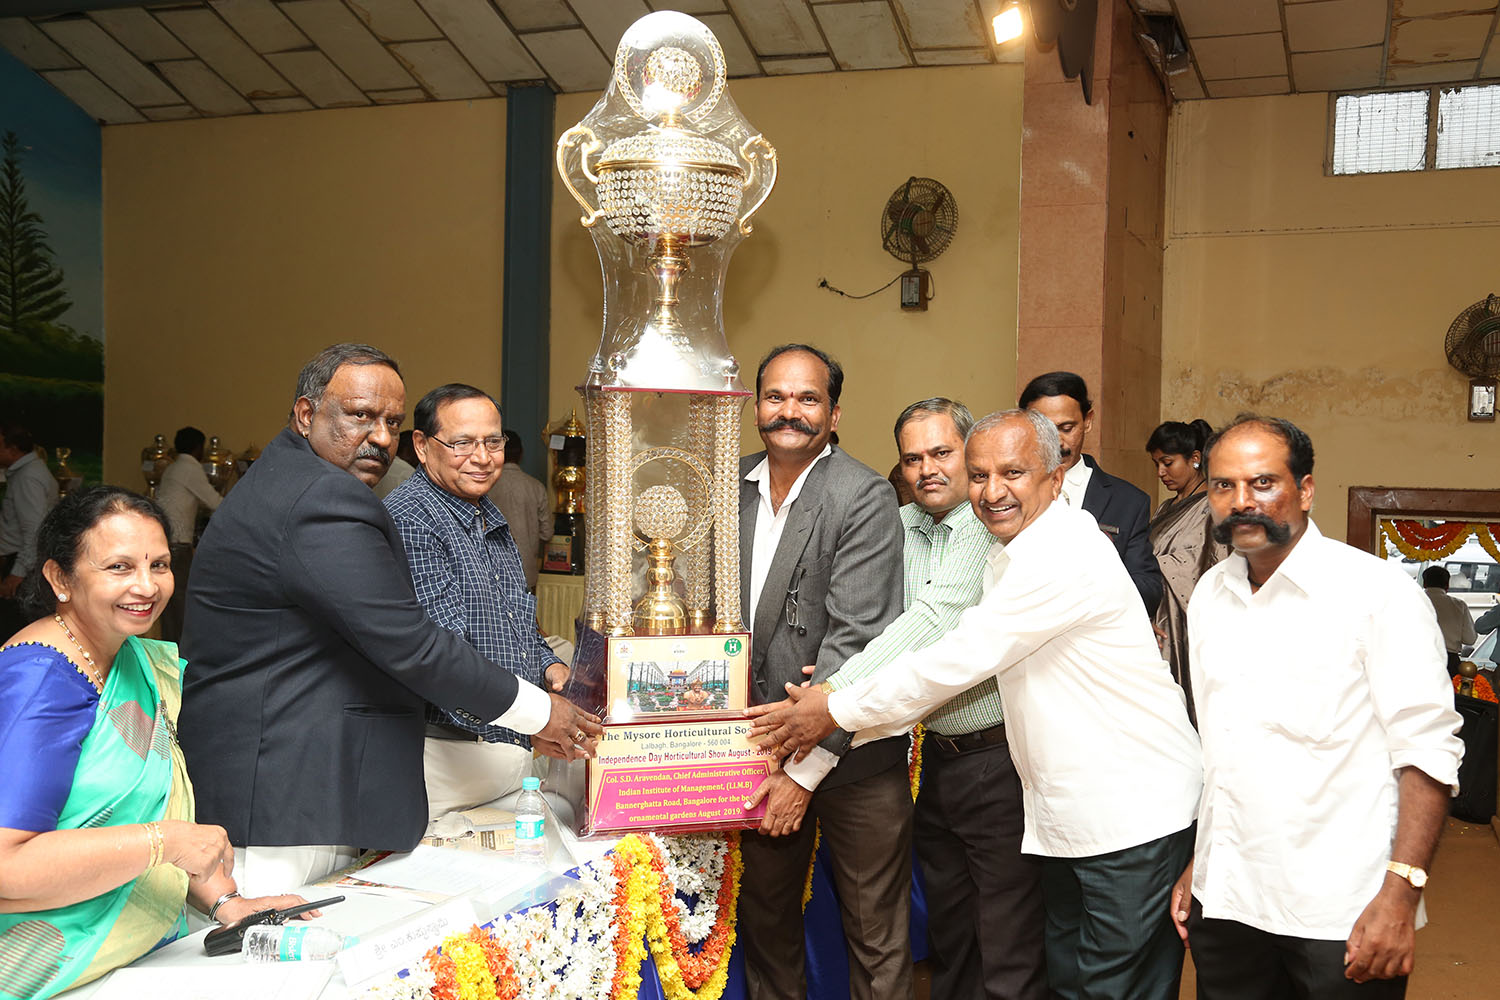 The IIMB Horticulture team receives the First prize for the Best Ornamental Garden award from Suresh Moona, eminent historian, and the Mysore Horticulture Society, Lalbagh, on the eve of Independence Day.